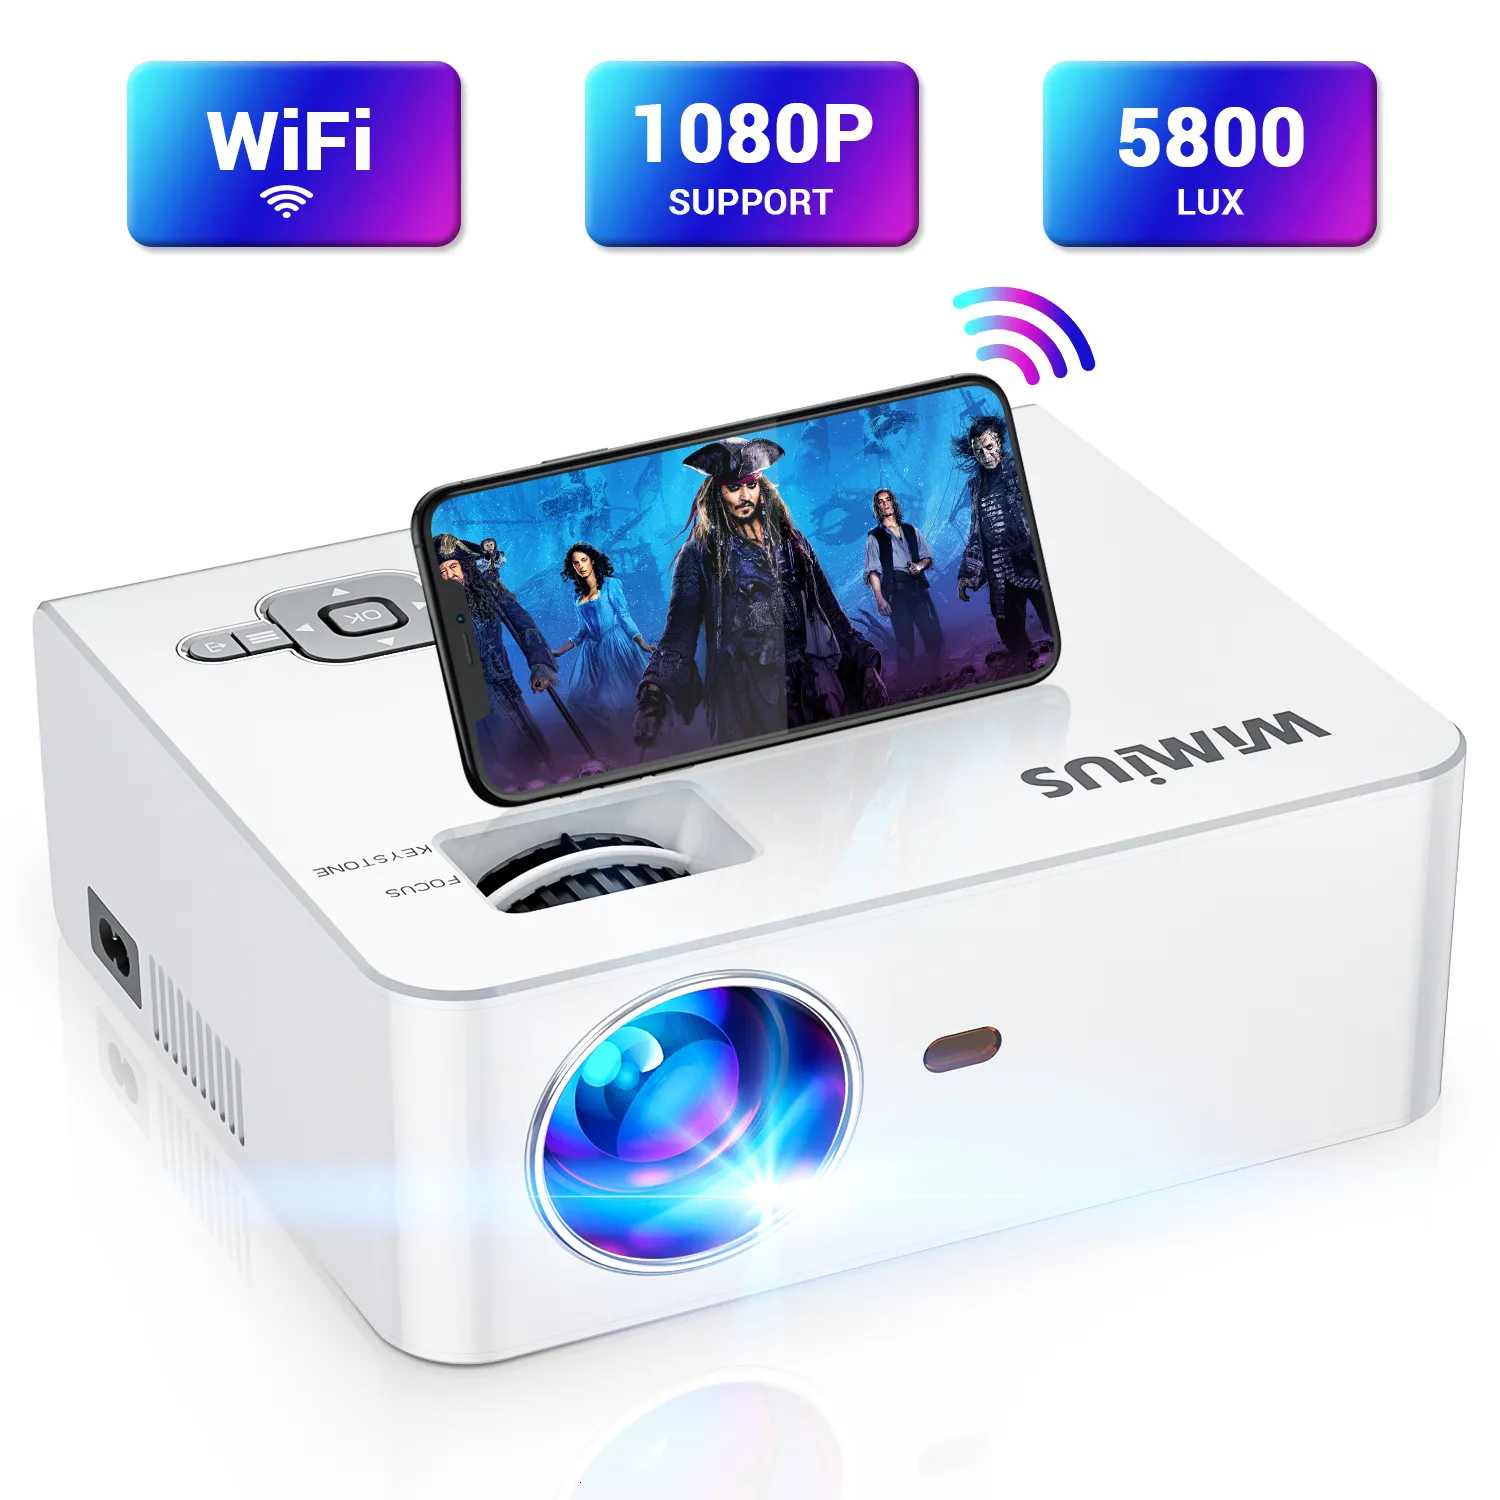 Projectors 1080P WiFi Enhanced Outdoor Wireless Video Movie Display Zoom  Phone S2 For Home Theater 230414 From Jiao10, $80.33